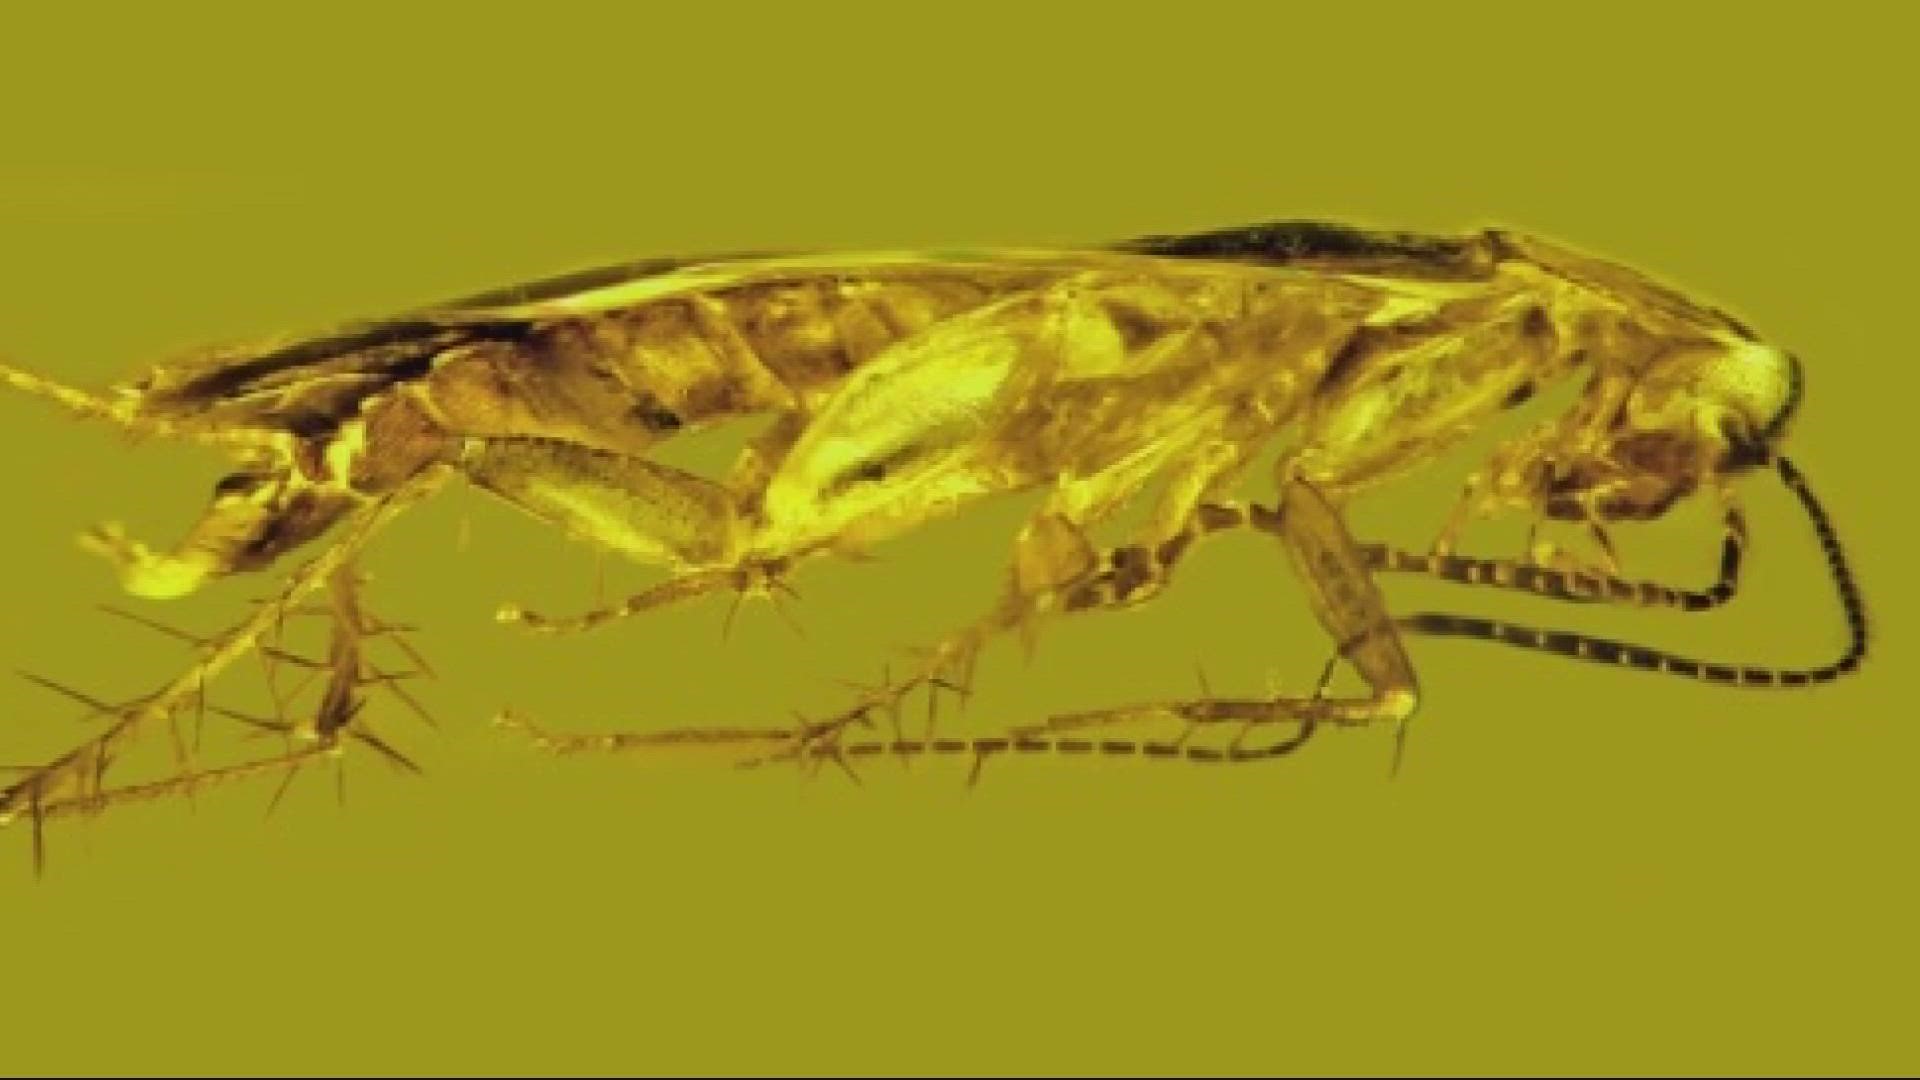 An Oregon State entomologist and researcher discovered a new cockroach species encased in 20 million-year-old amber. The specimen had an intact sperm pouch